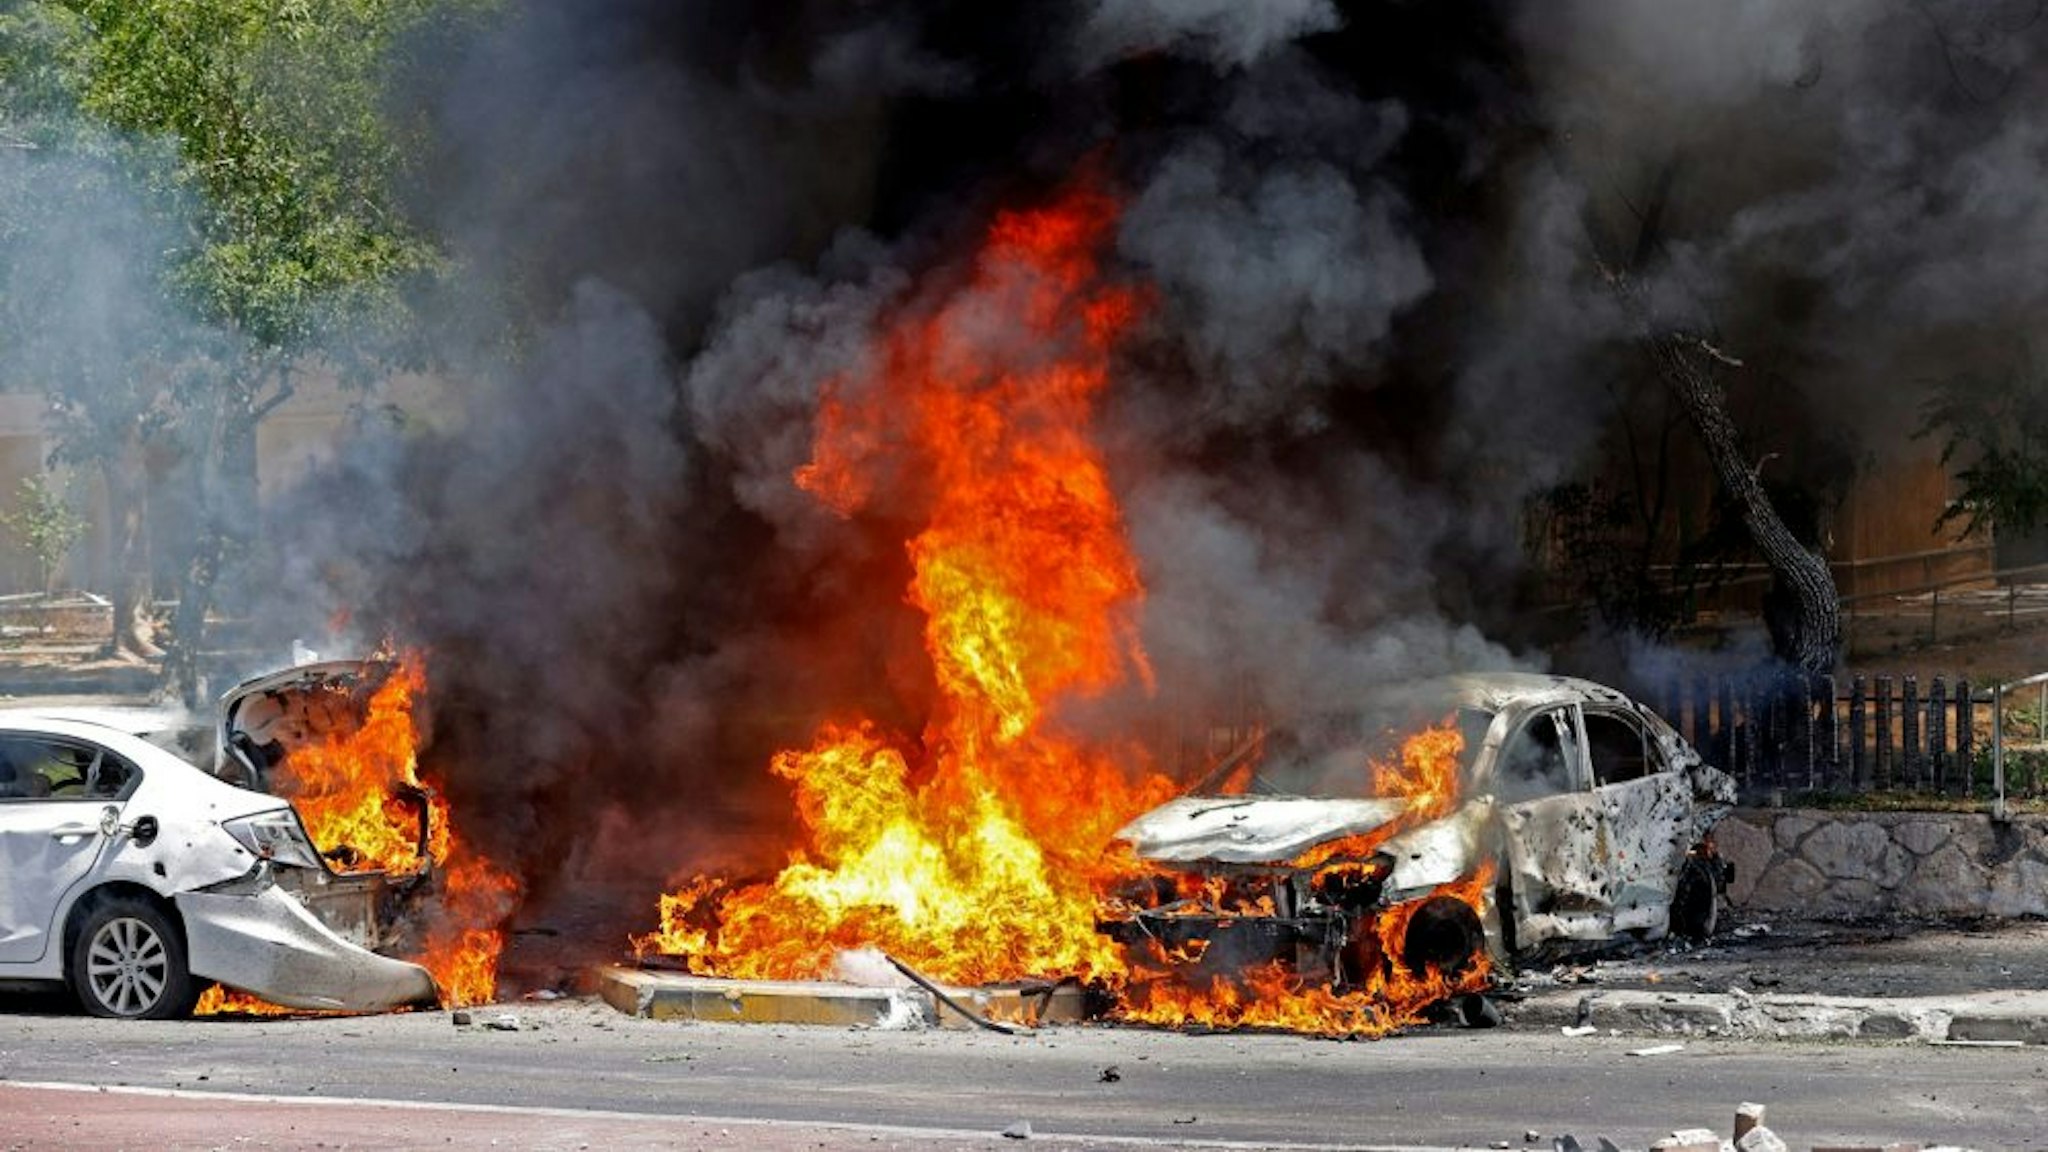 A picture taken on May 11, 2021 shows burning cars after a rocket launched from the Gaza Strip, controlled by the Palestinian Hamas movement, landed in the southern Israeli city of Ashkelon. - Israel and Hamas exchanged heavy fire, in a dramatic escalation between the bitter foes sparked by unrest at Jerusalem's flashpoint Al-Aqsa Mosque compound.